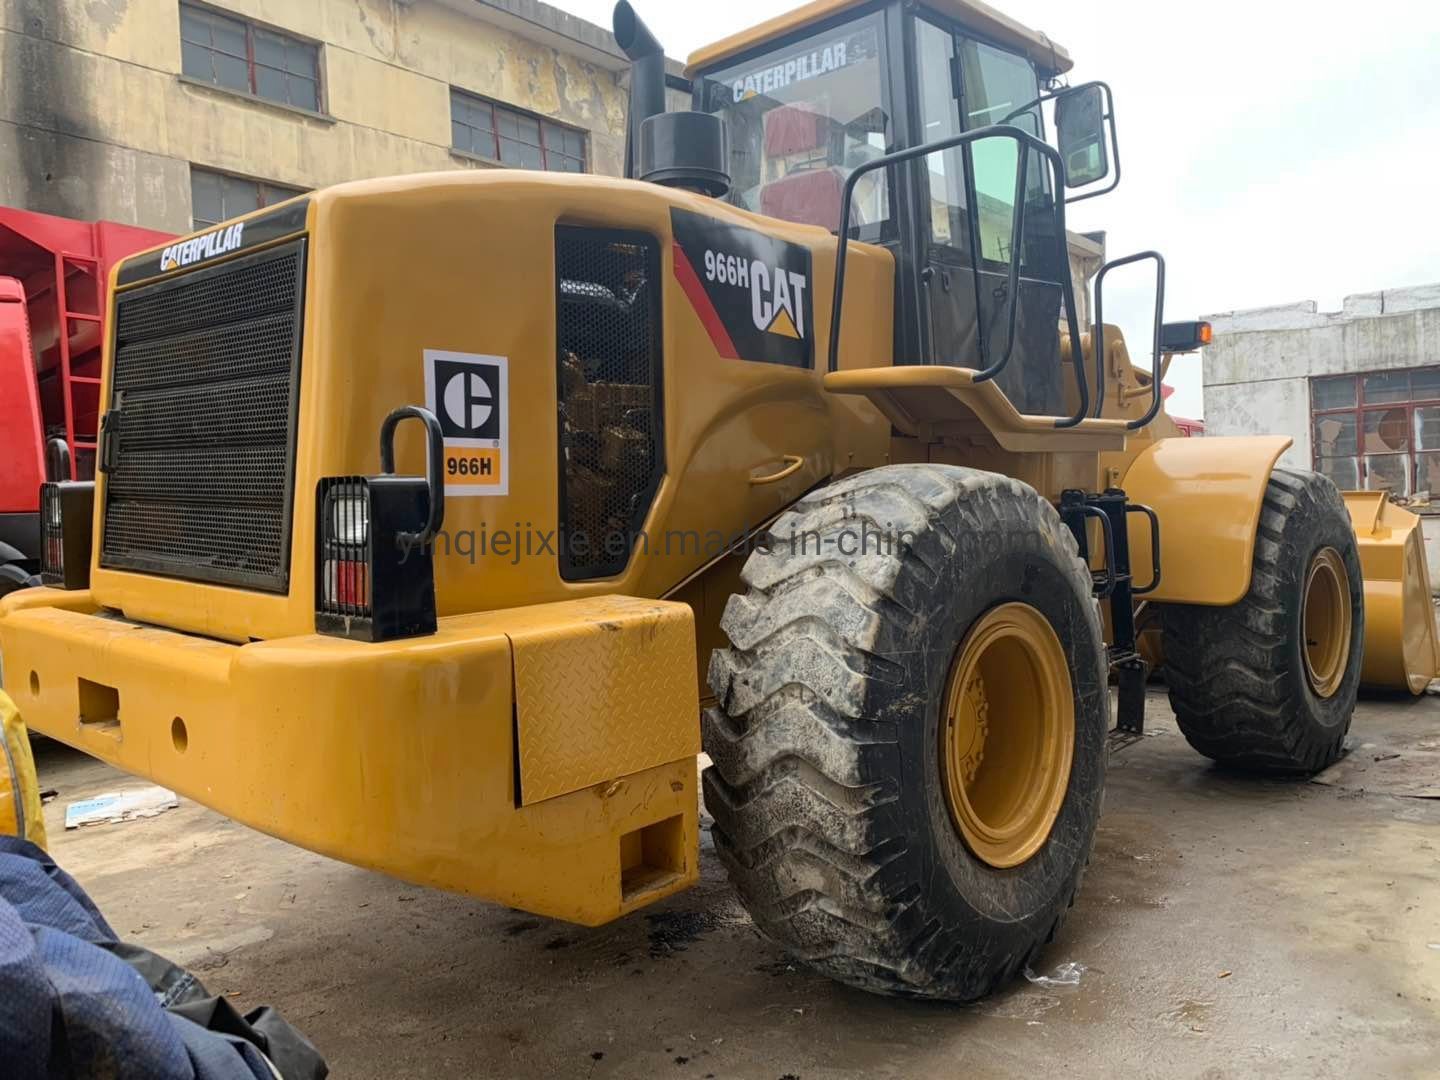 Used Caterpillar 966h Wheel Loader for Sale!